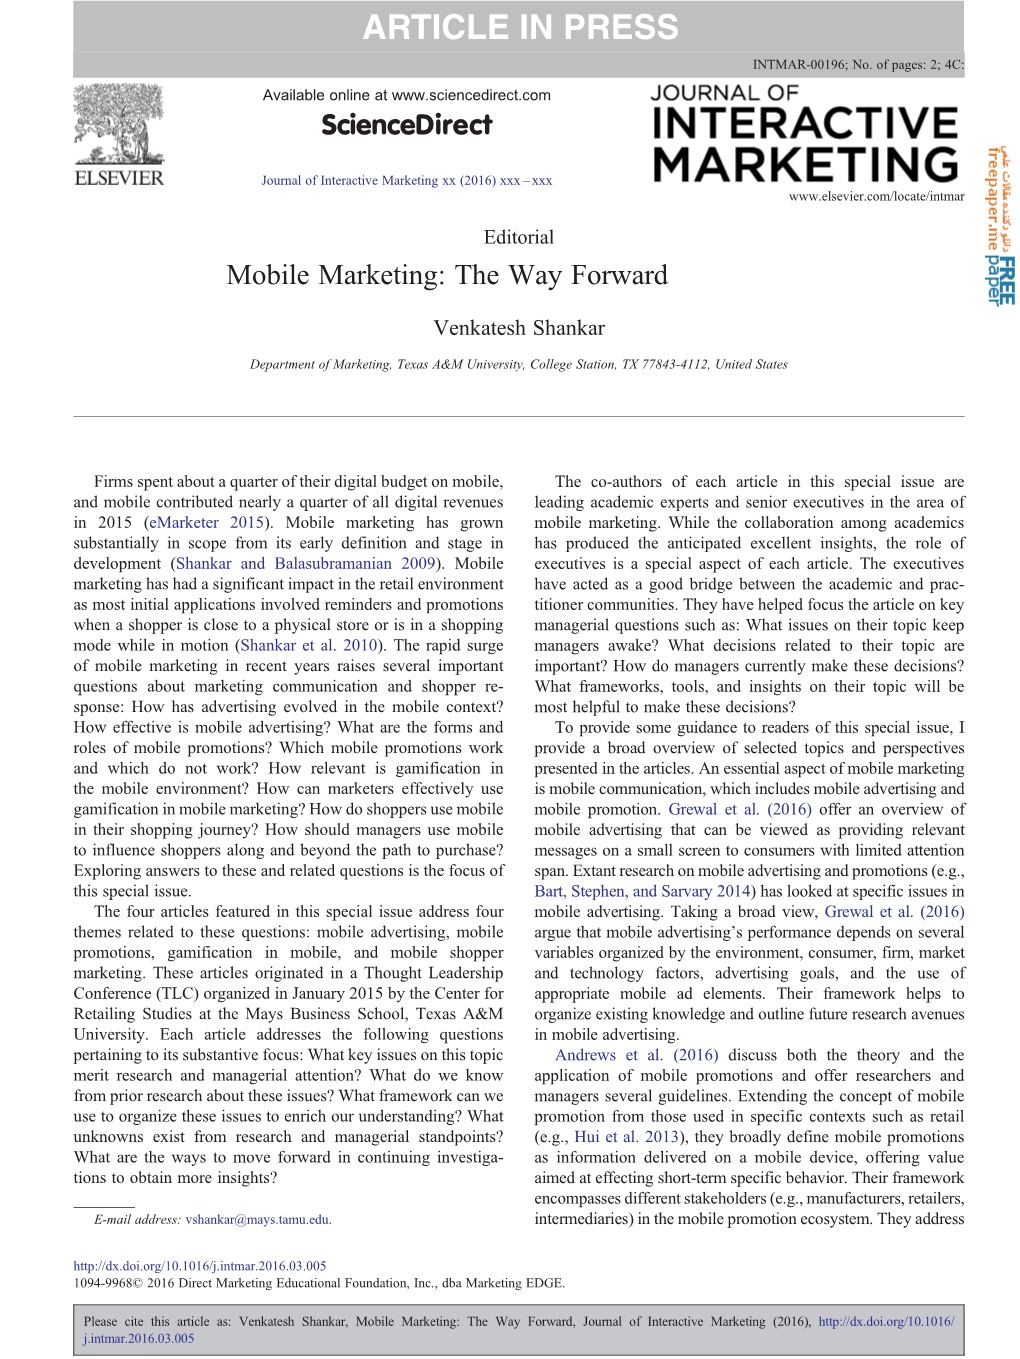 Mobile Marketing: the Way Forward